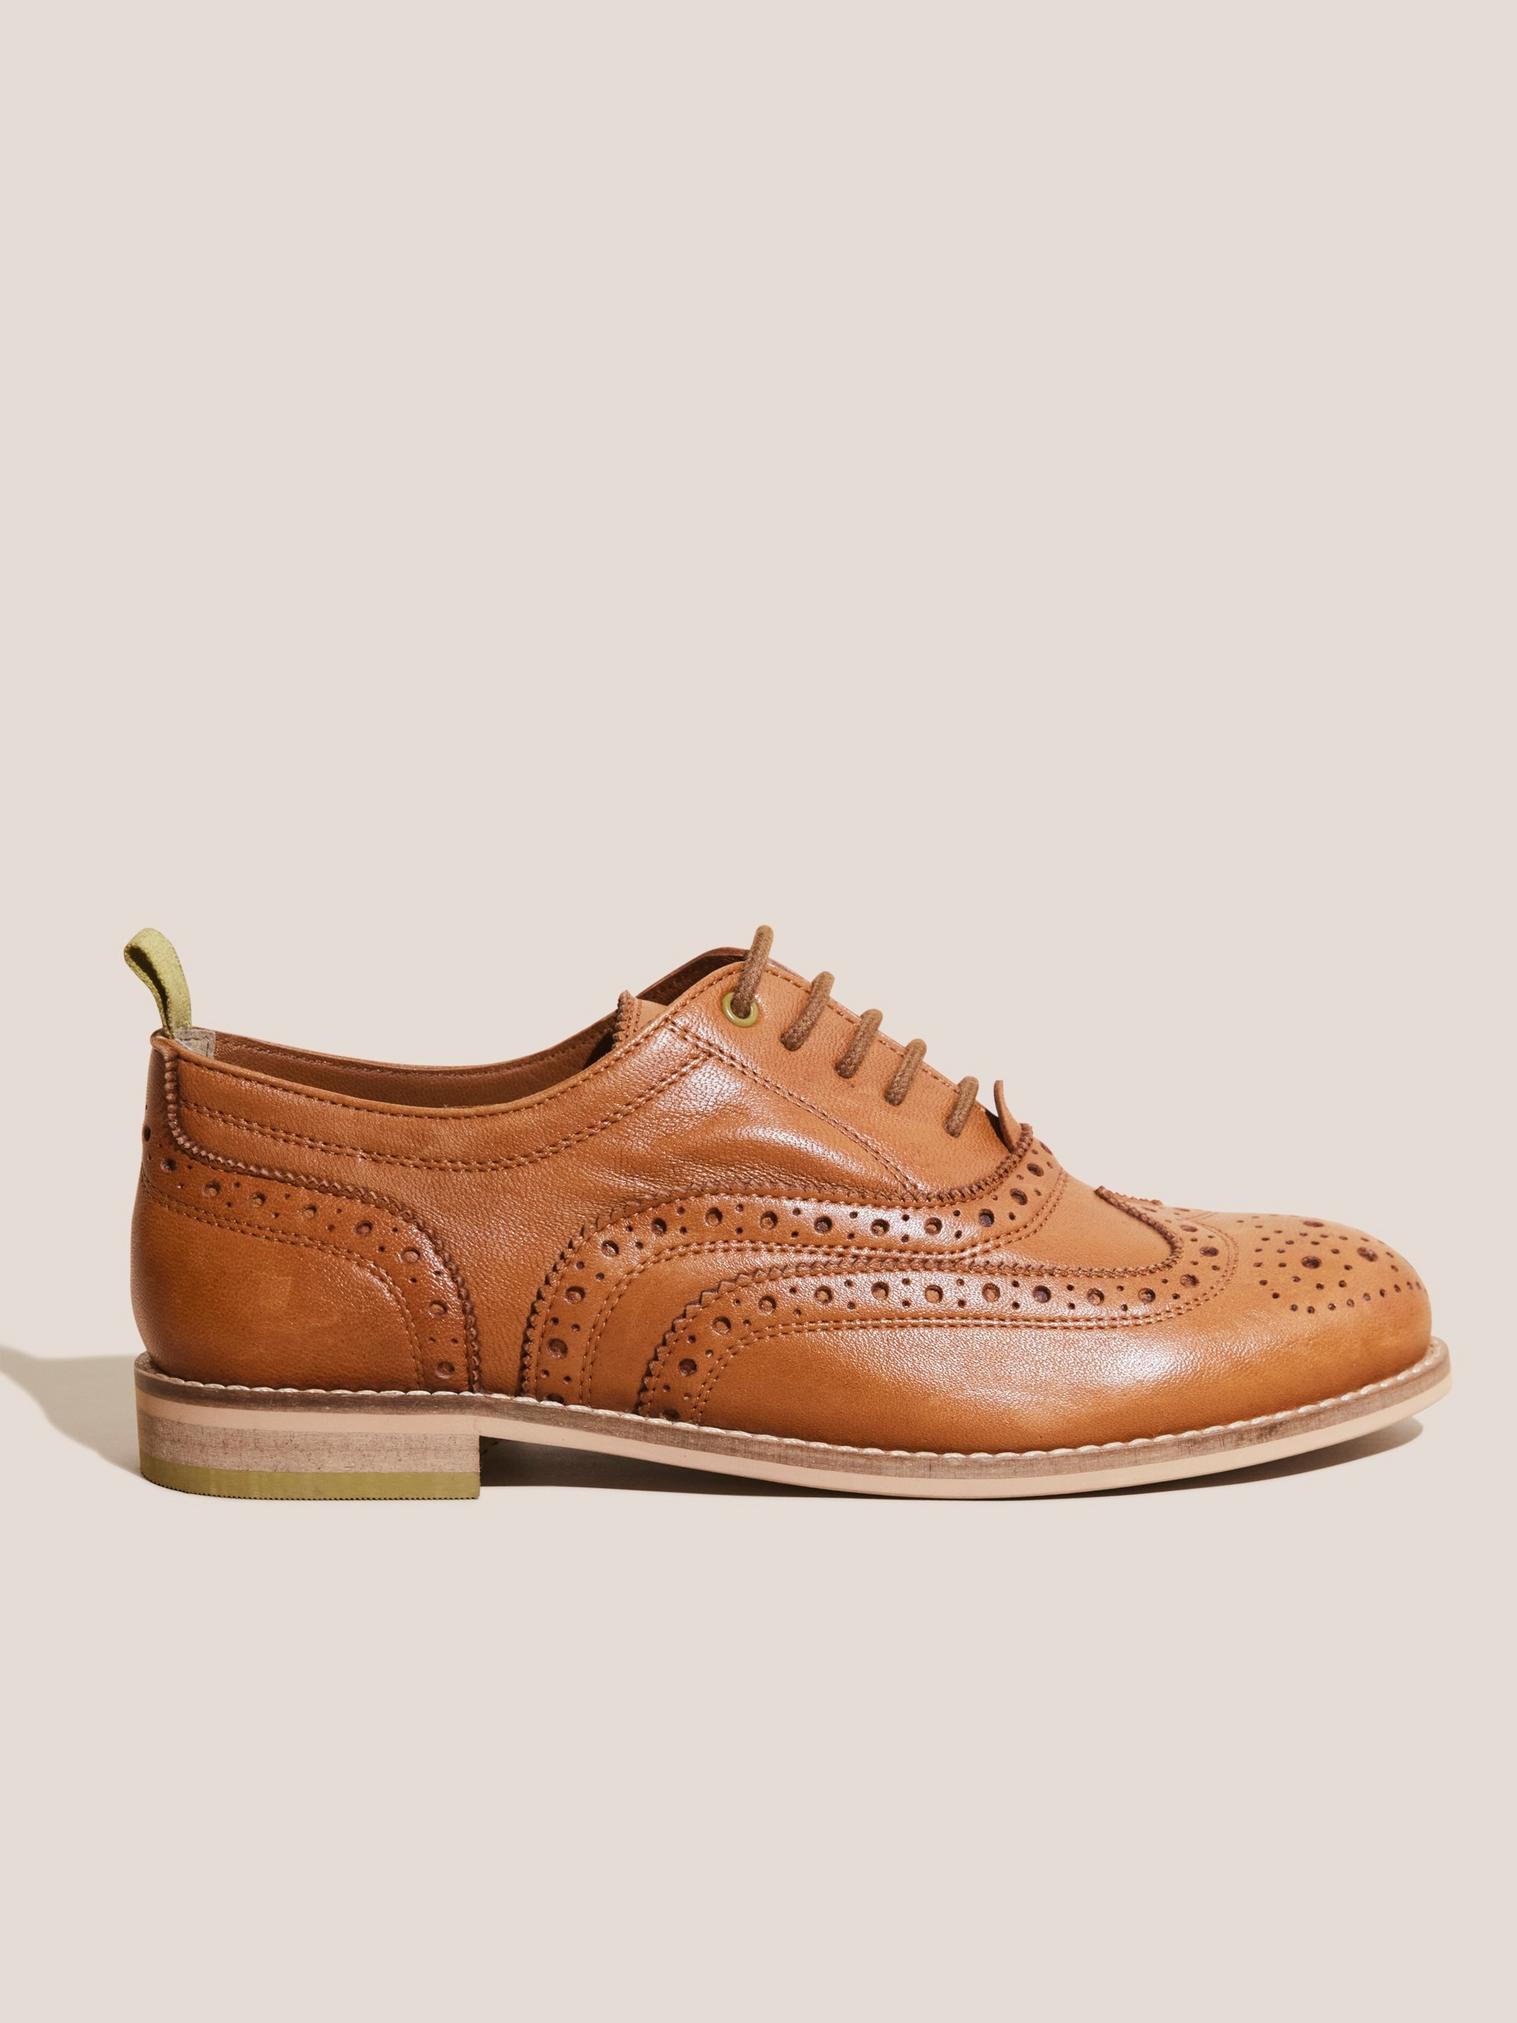 Thistle Lace Up Brogue in MID TAN - MODEL FRONT